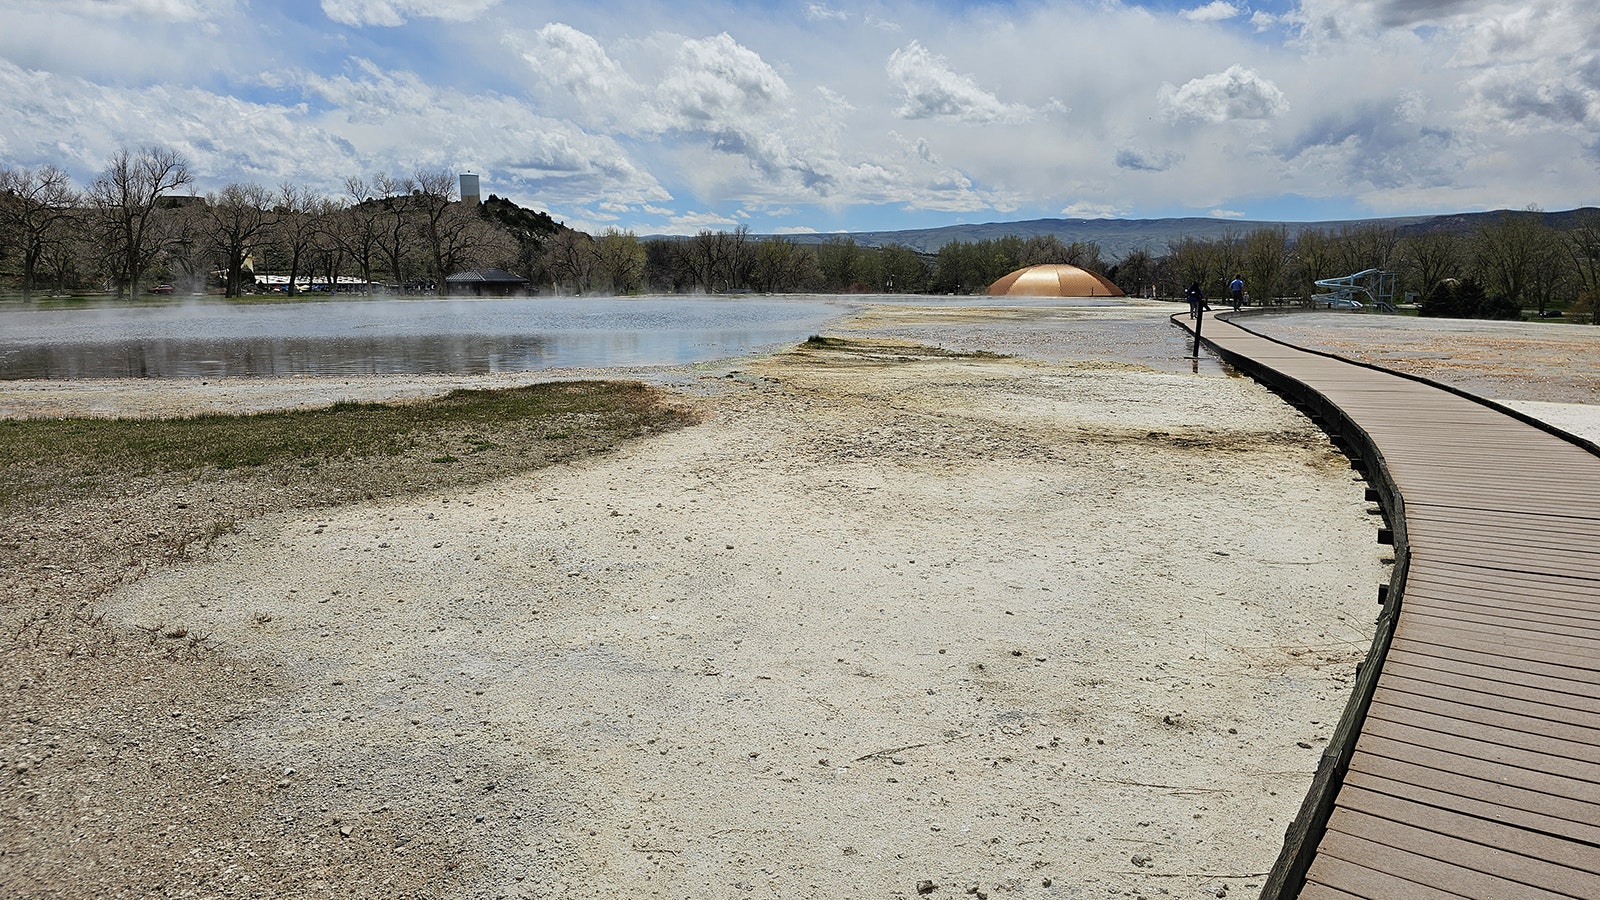 The Teepee Pool's copper dome shines in the distance behind the hot spring at Hot Springs State Park. A boardwalk has been constructed around the spring so that guests can walk around it and explore without damaging any of its fragile features.